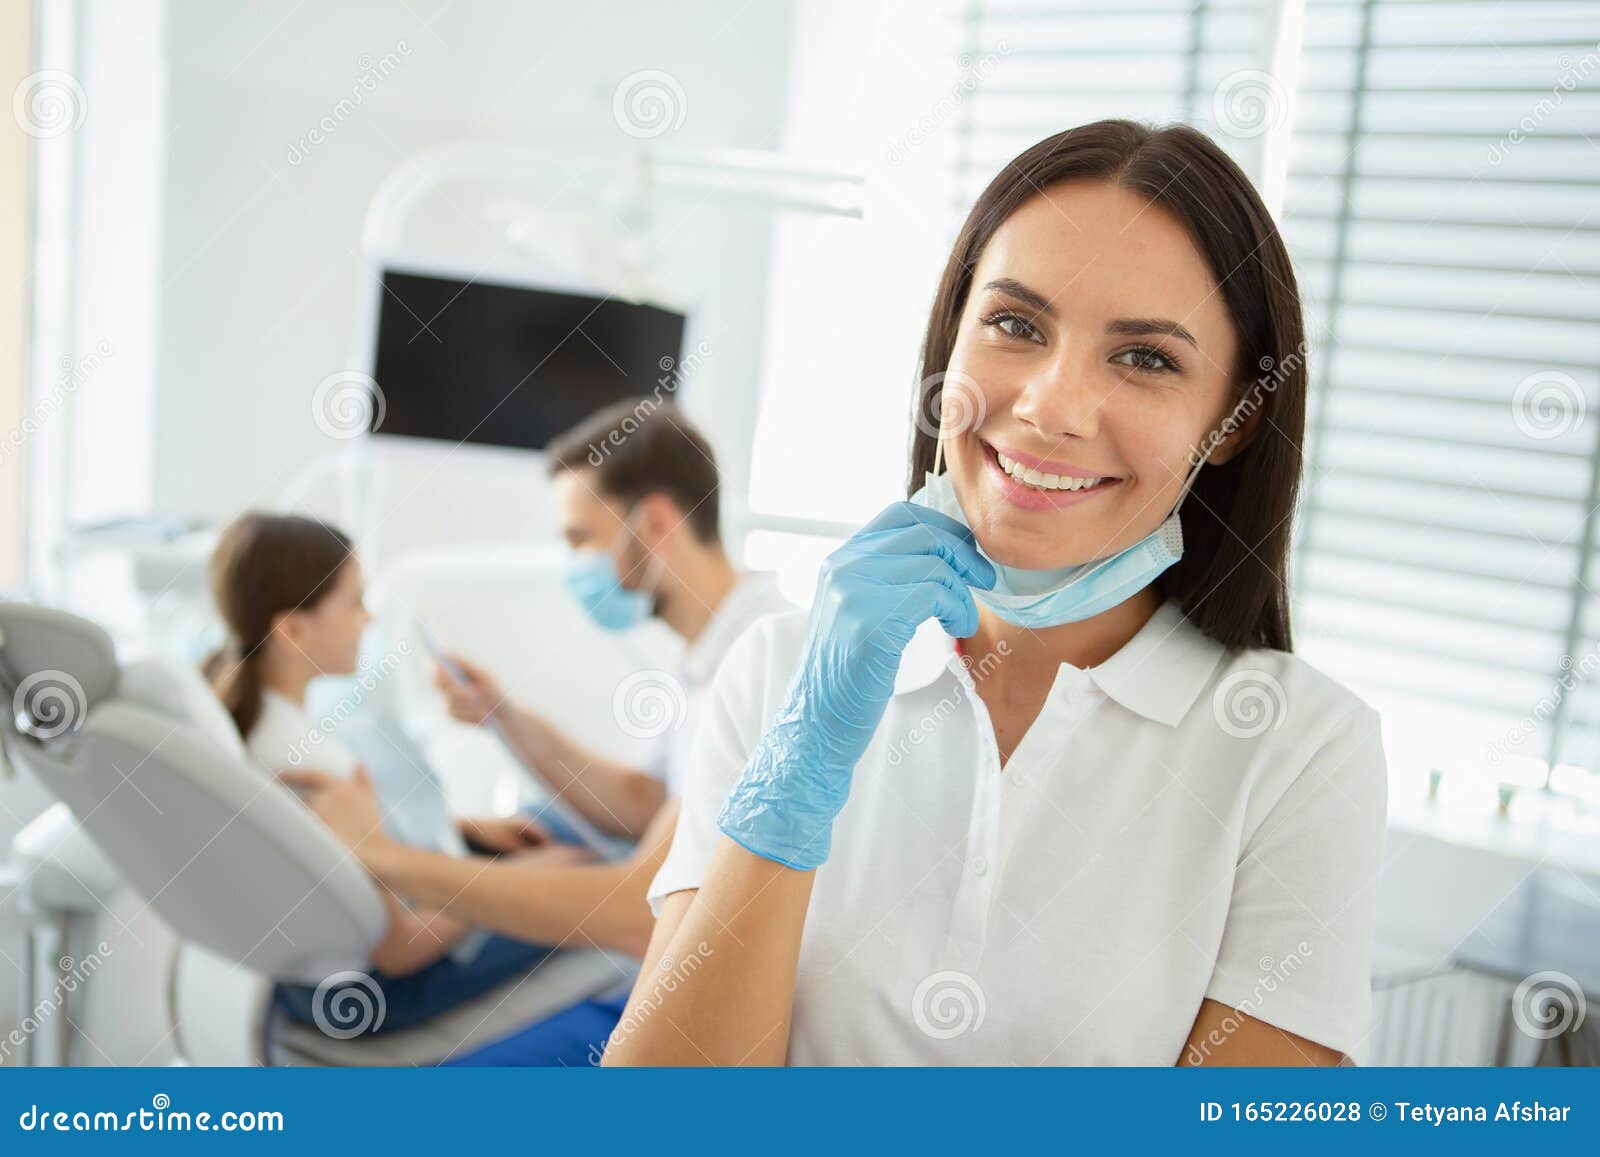 smiling female doctor showing looking at the camera while her collegue working with girl in dental chair on the background